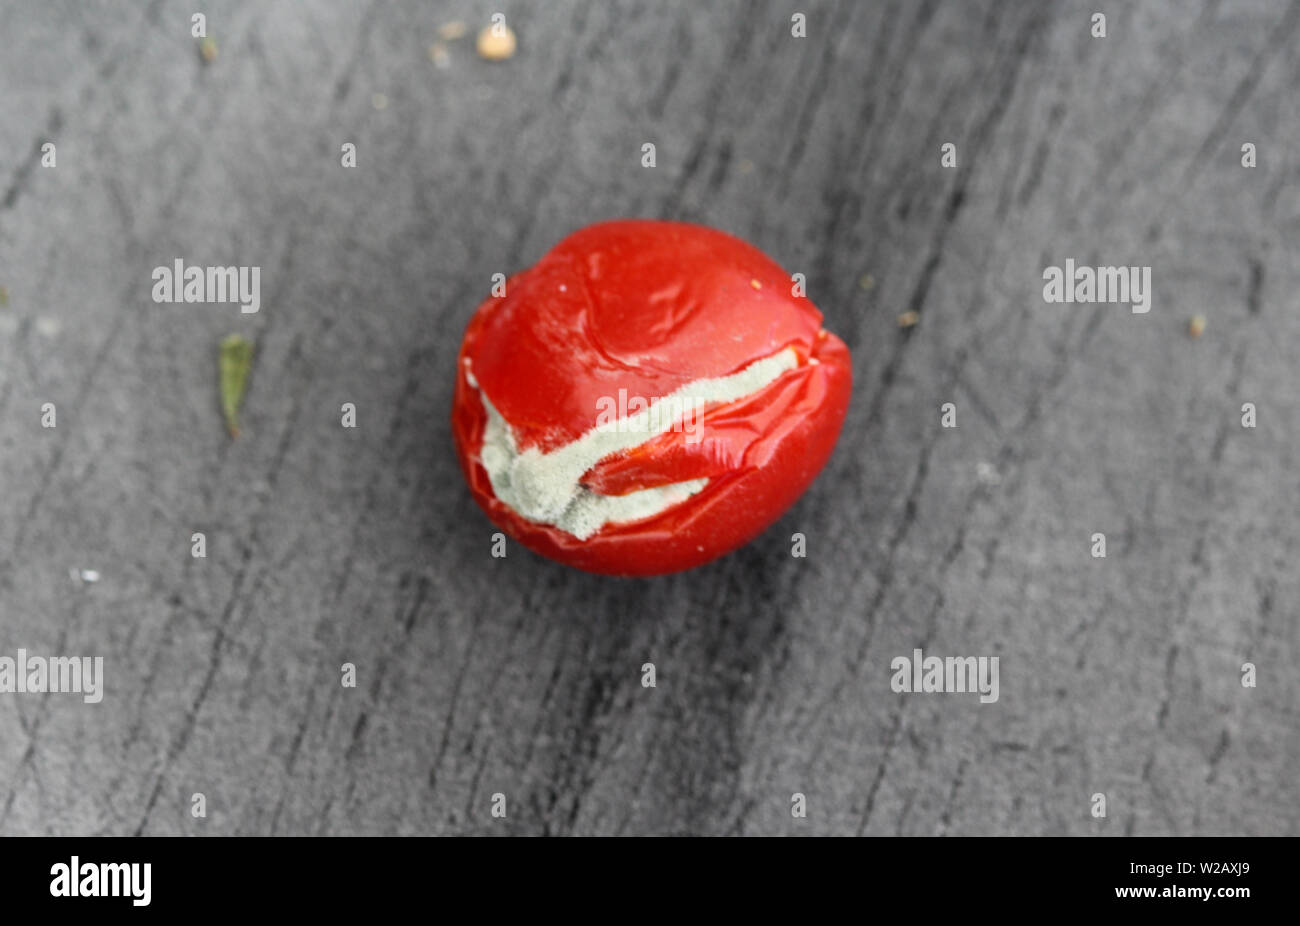 close up of Rotten cherry tomato on black cutting board background Stock Photo